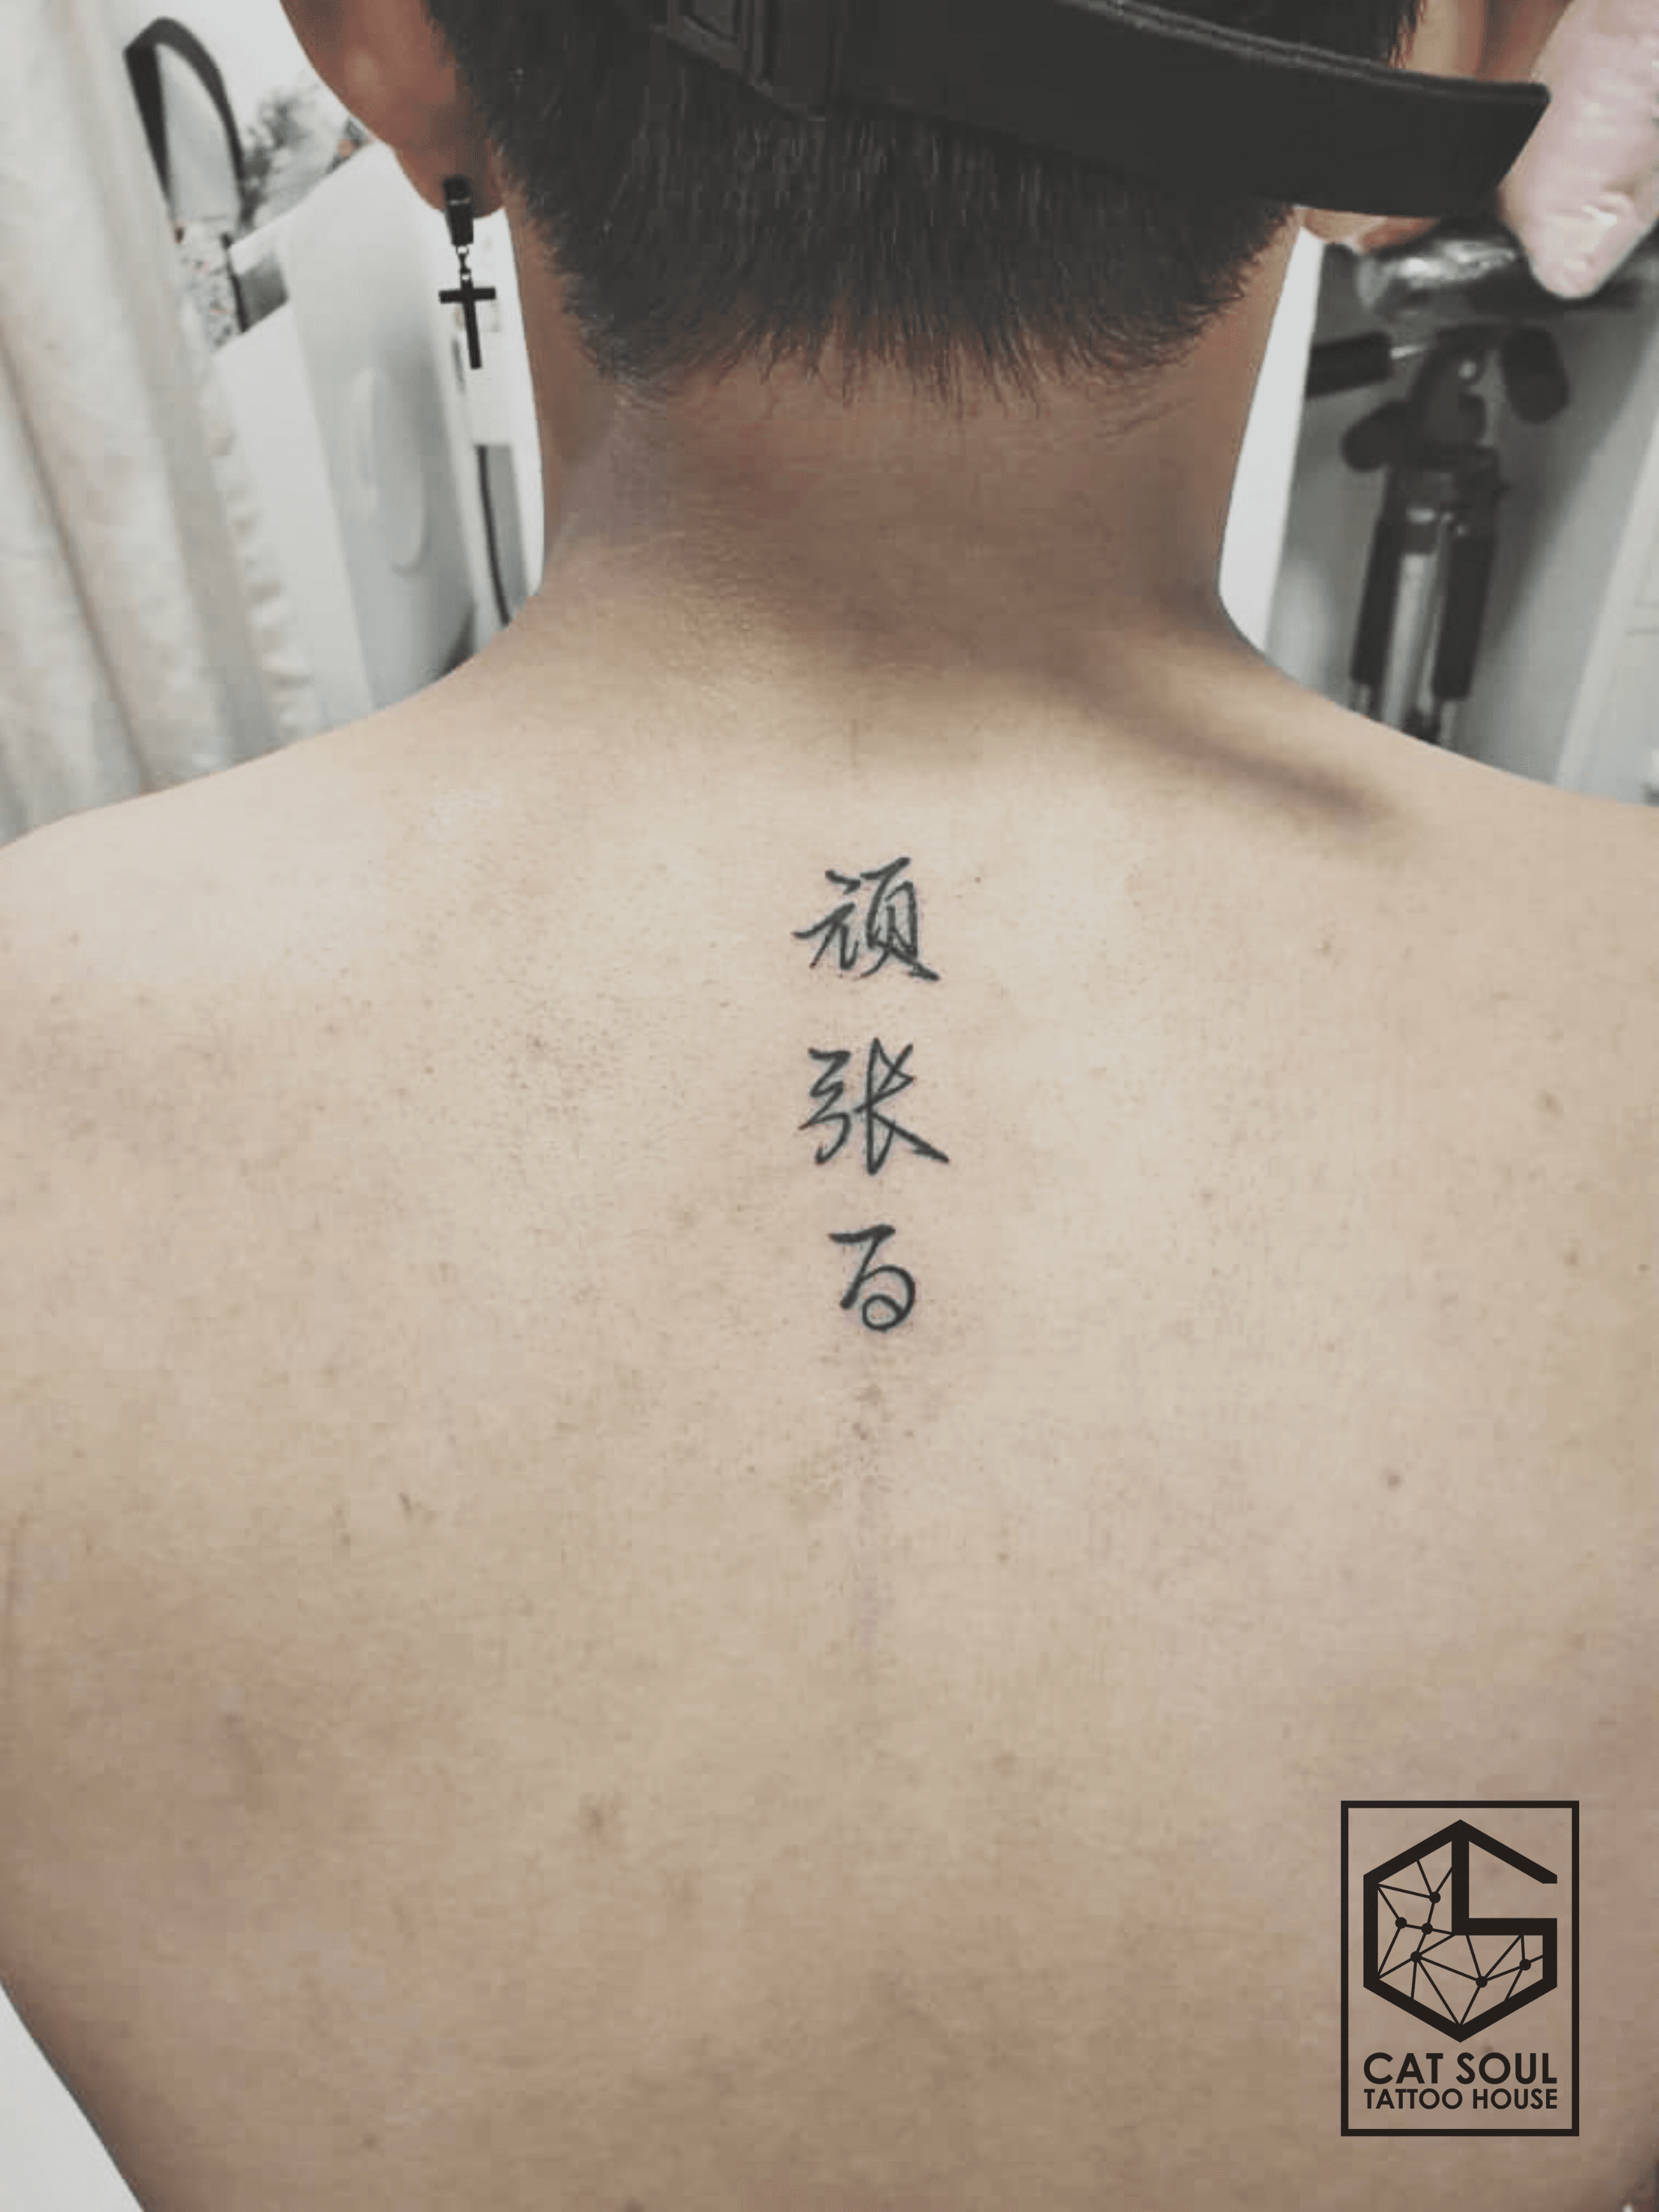 Share 85 chinese symbol tattoos down spine latest  thtantai2